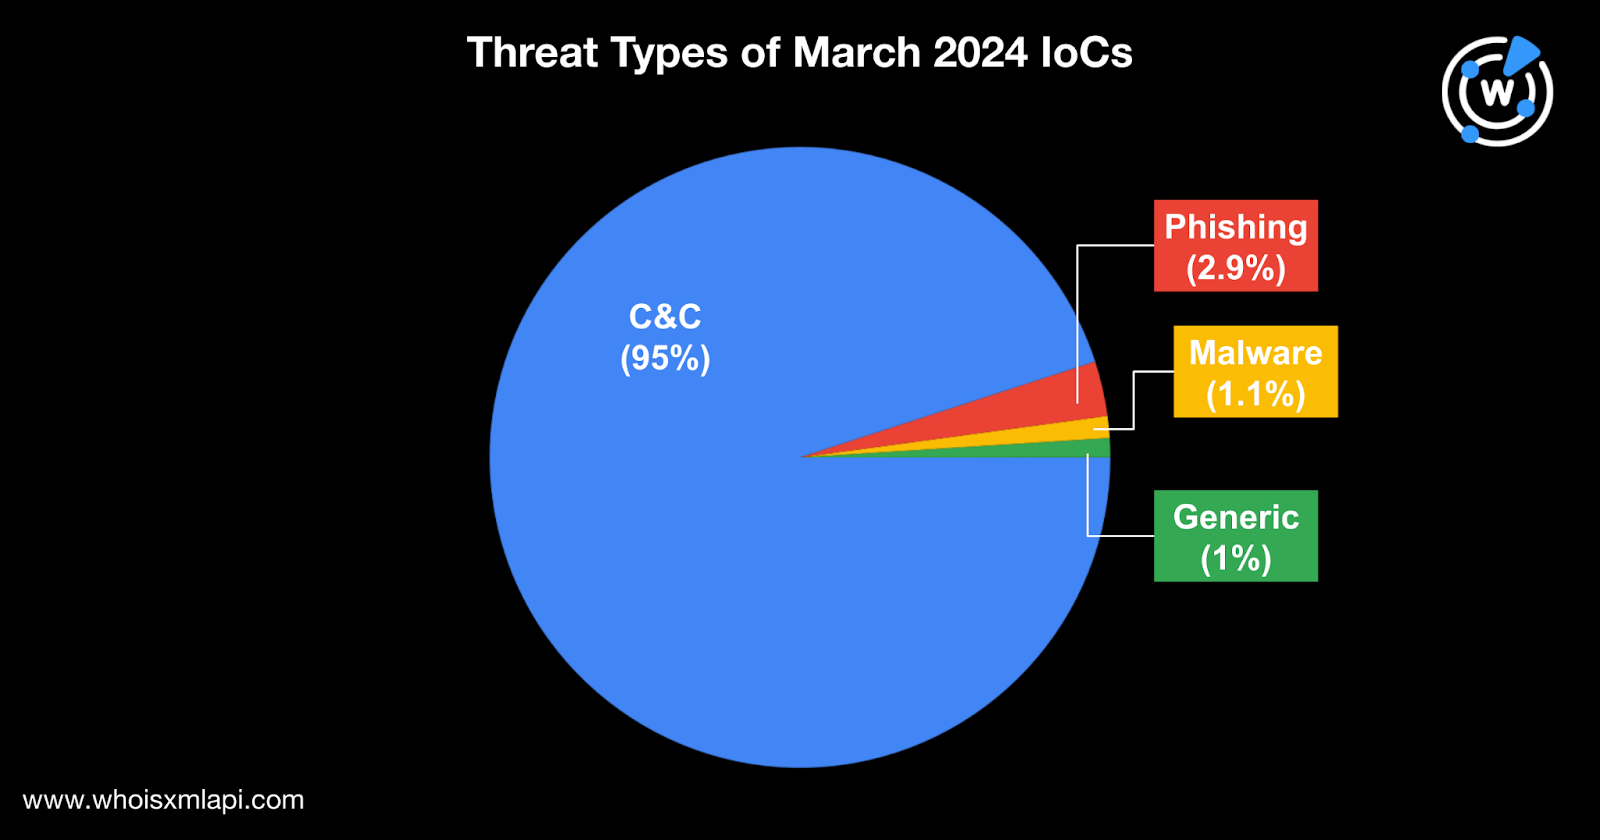 Threat types of March 2024 IoCs